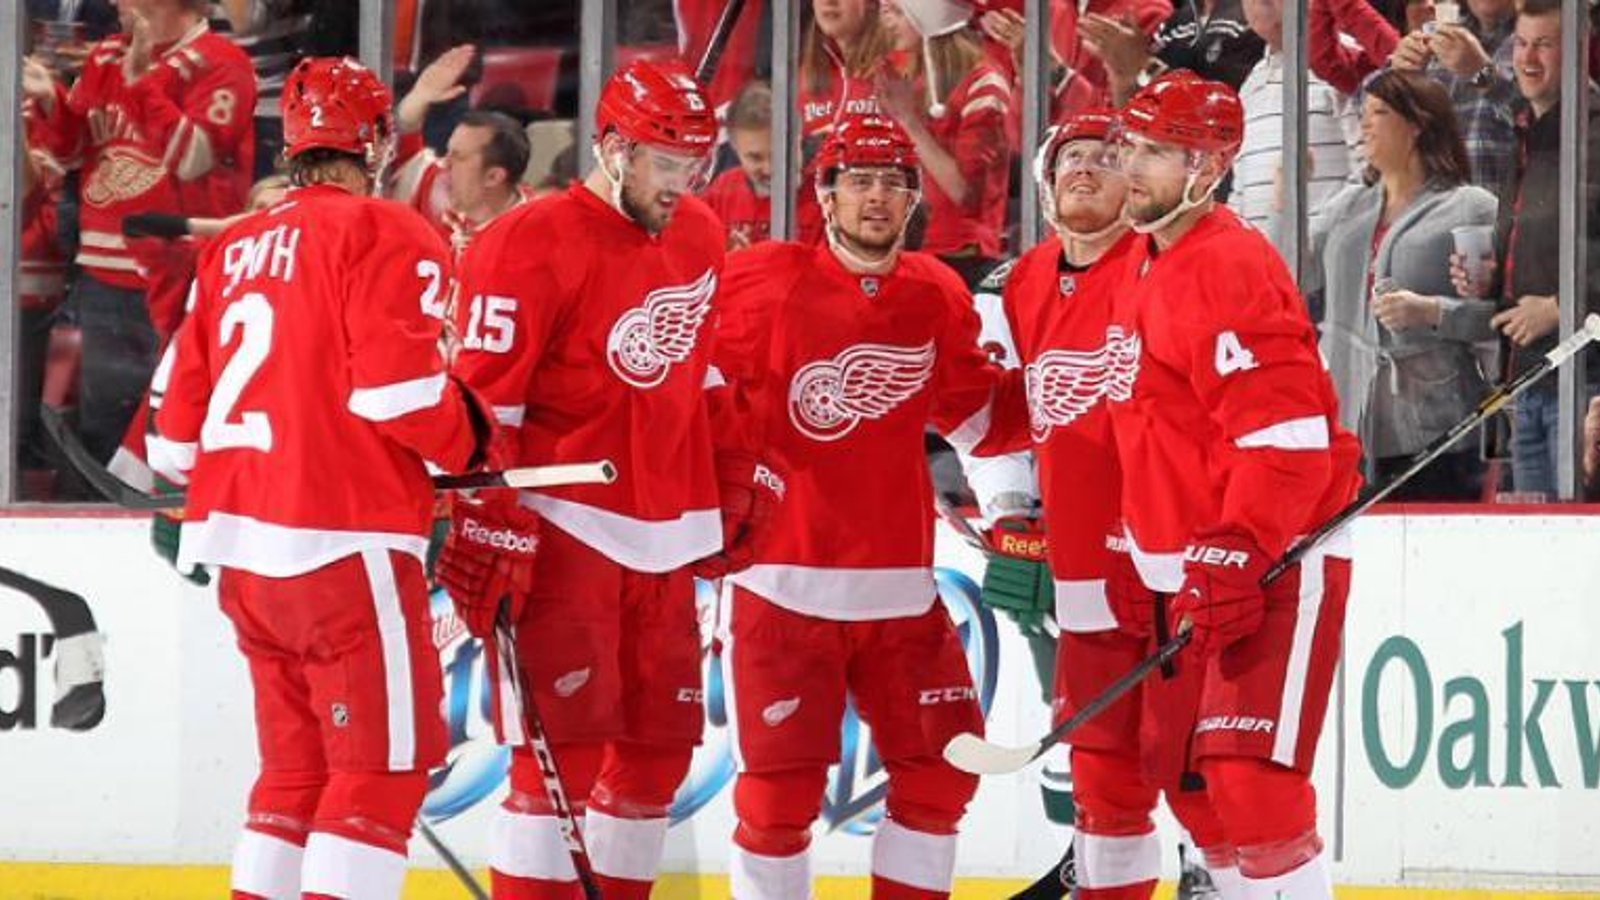 Red Wings rookie told he has made the team in interesting fashion